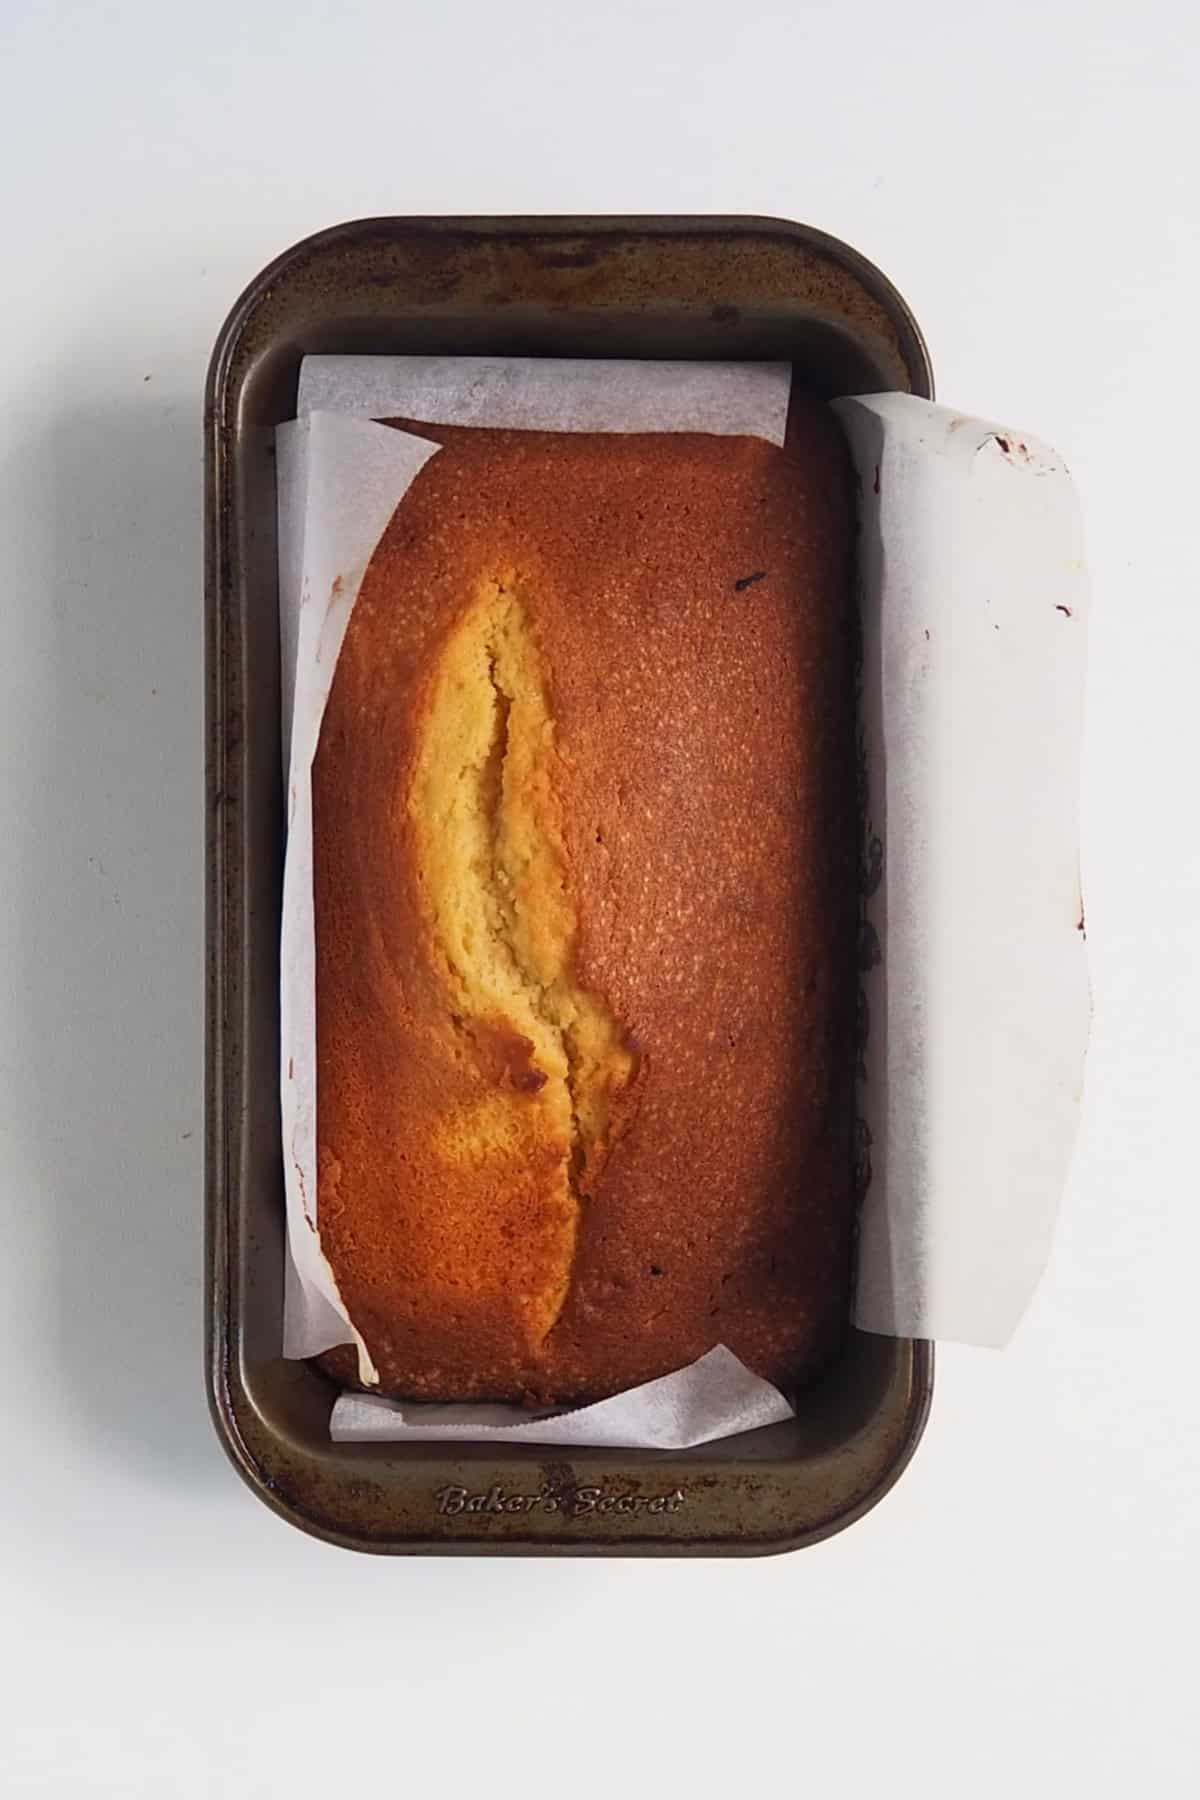 Baked Banana and Pineapple cake in a loaf tin straight from the oven.